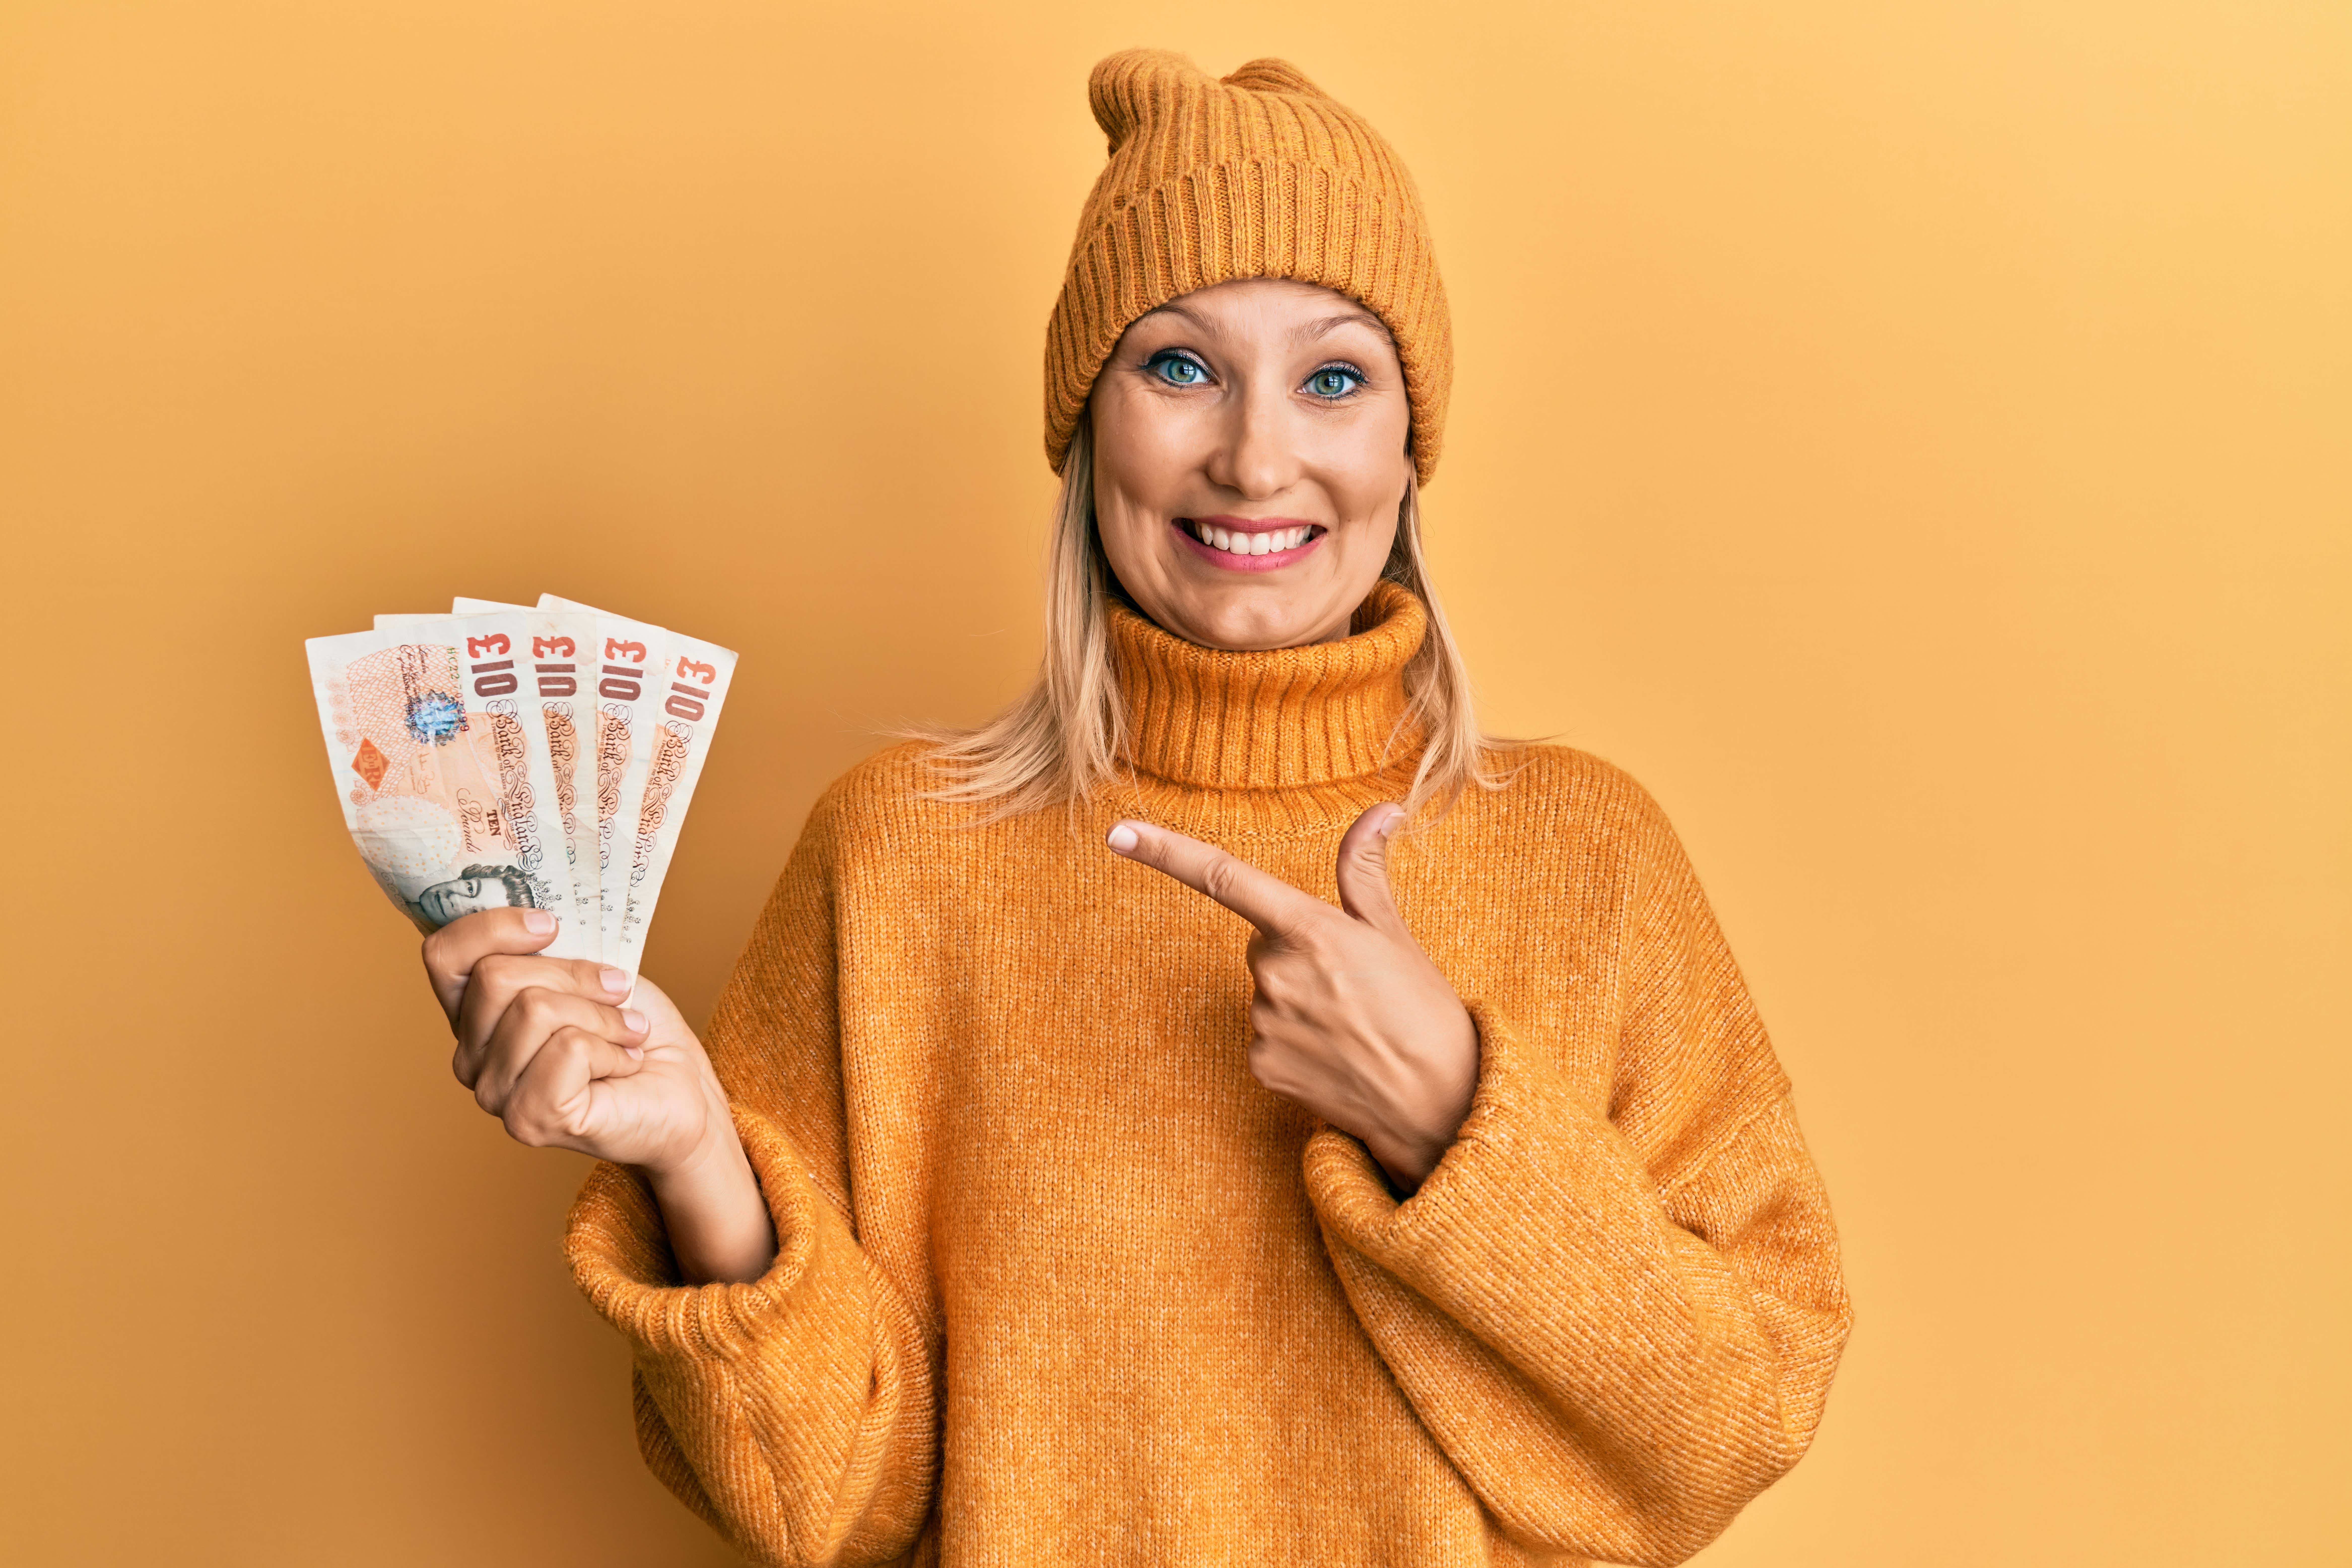 A young white woman dressed entirely in mustard yellow and standing against a mustard yellow backdrop holds a fan of UK bank notes in her right hand. He left hand is pointing to the money and she has a big smile on her face. 